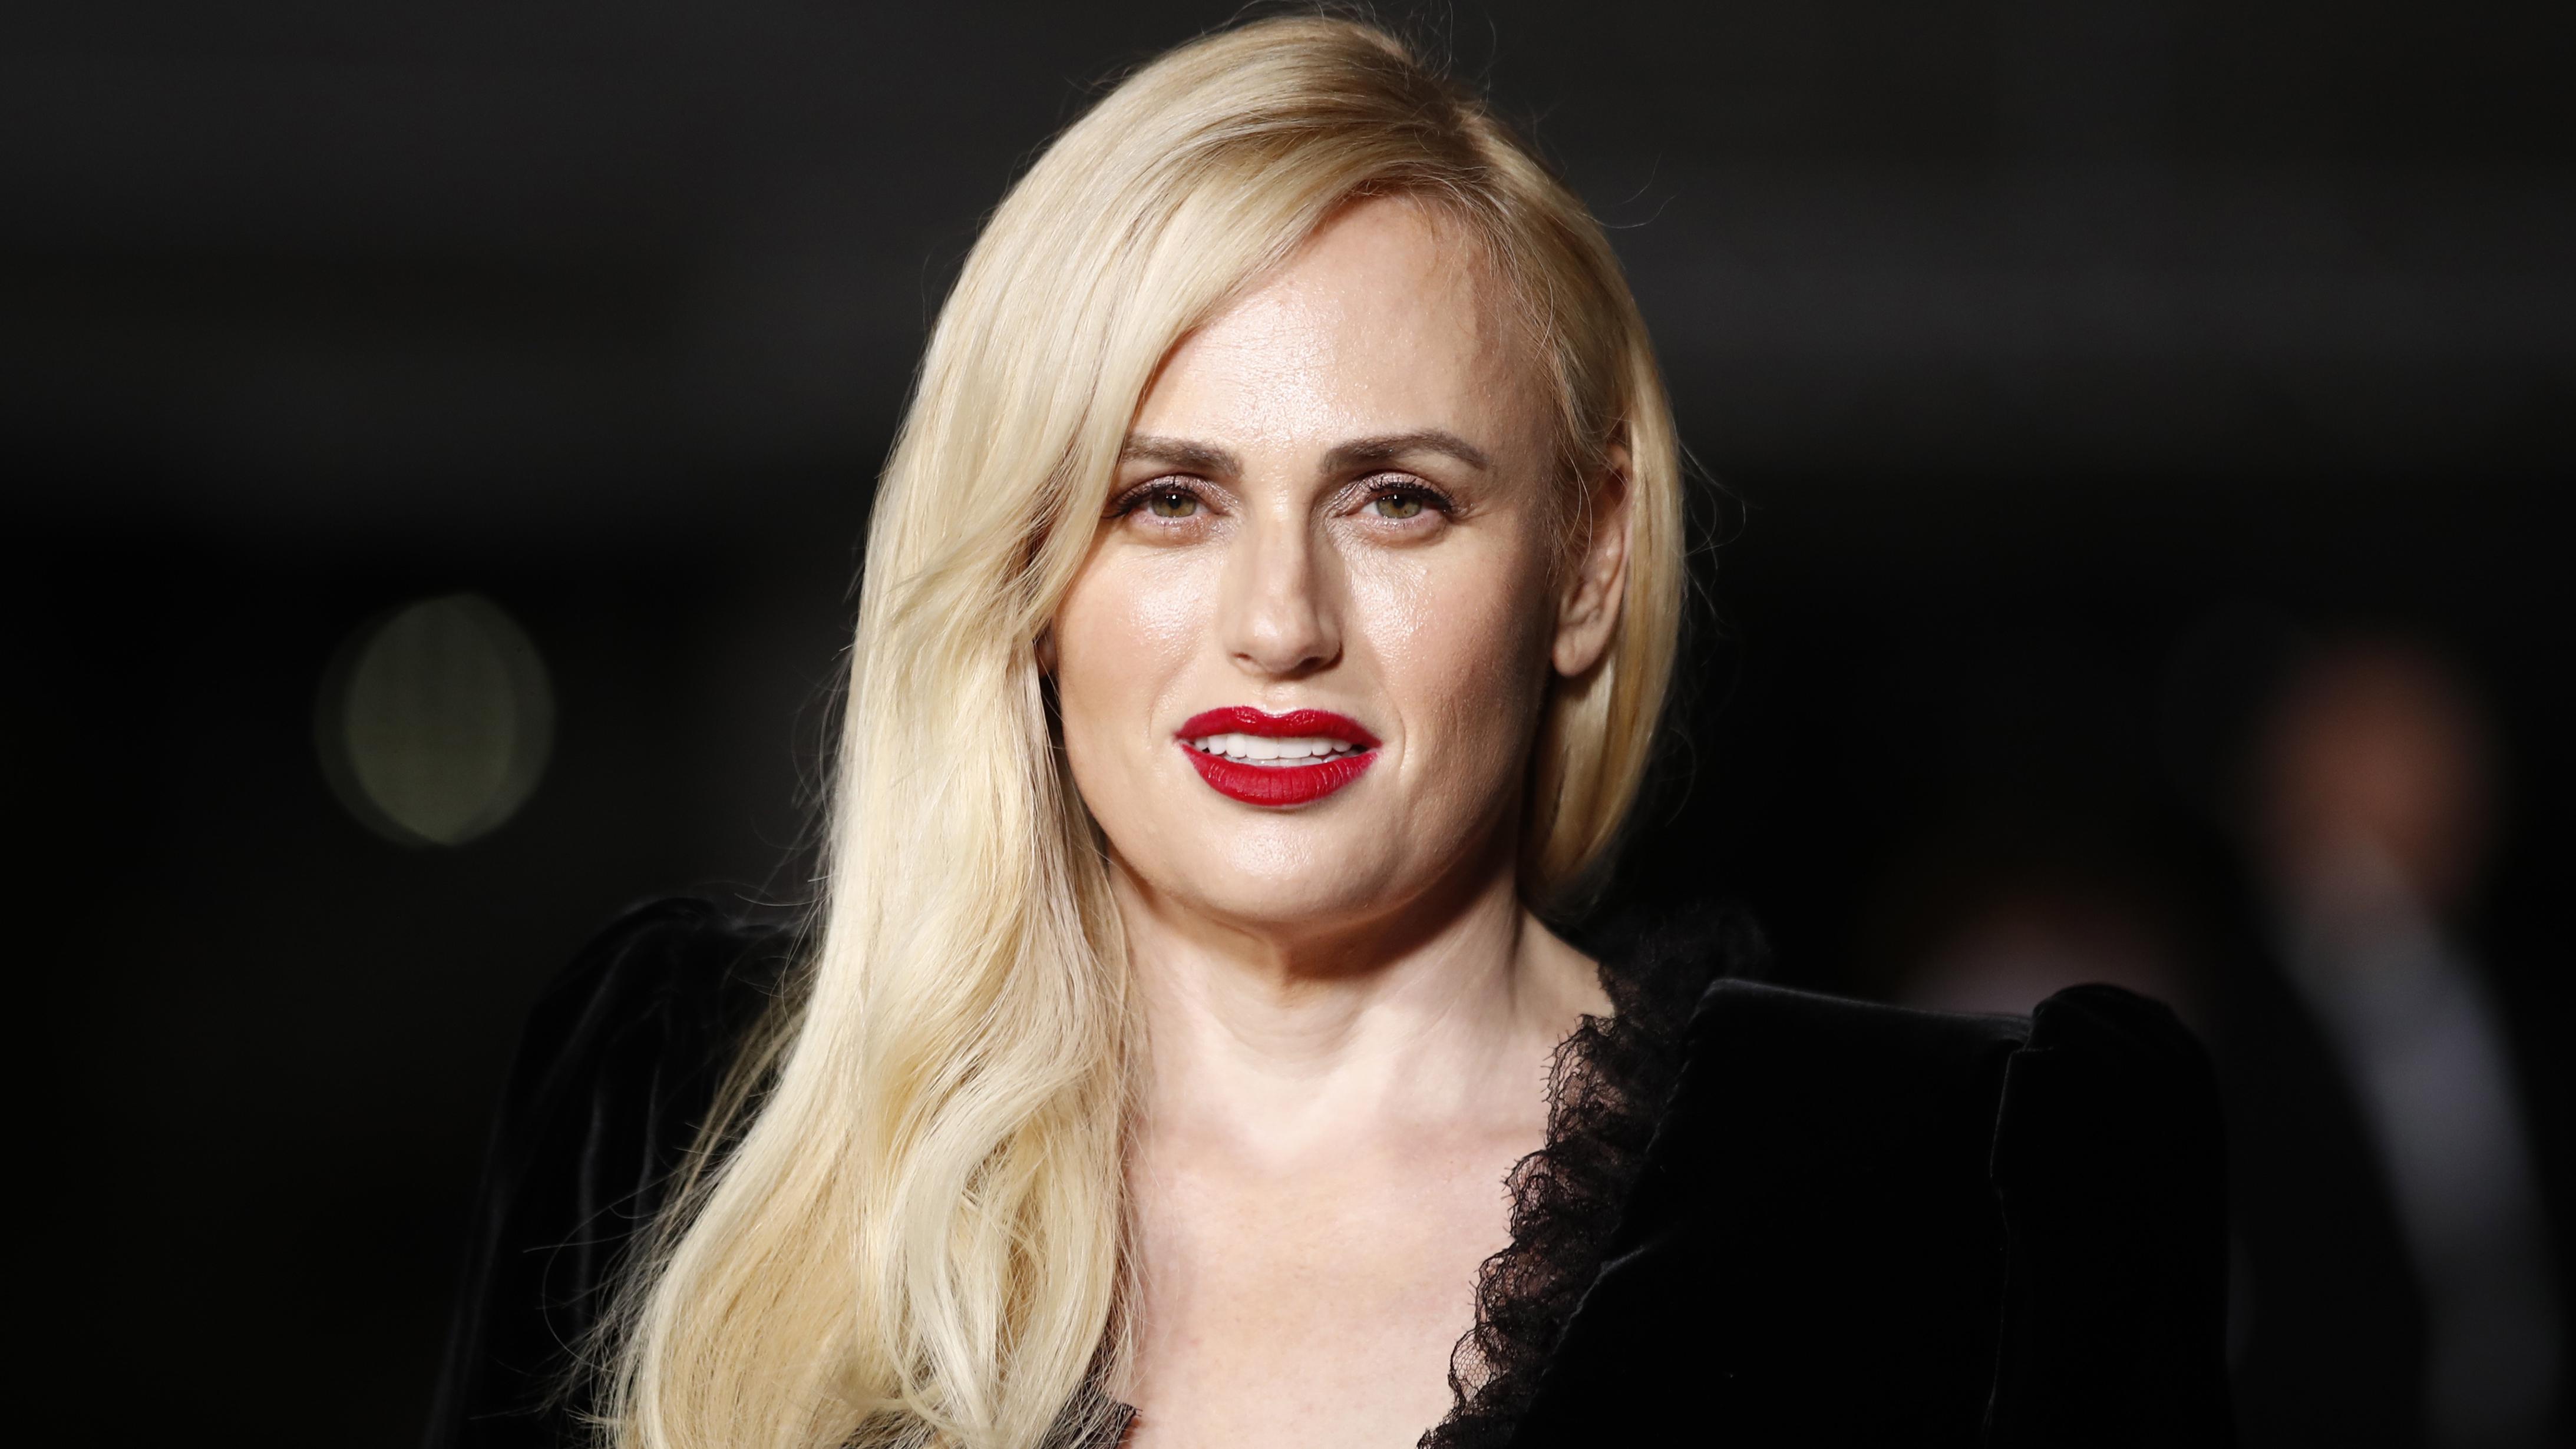 Rebel Wilson announces birth of child by surrogate